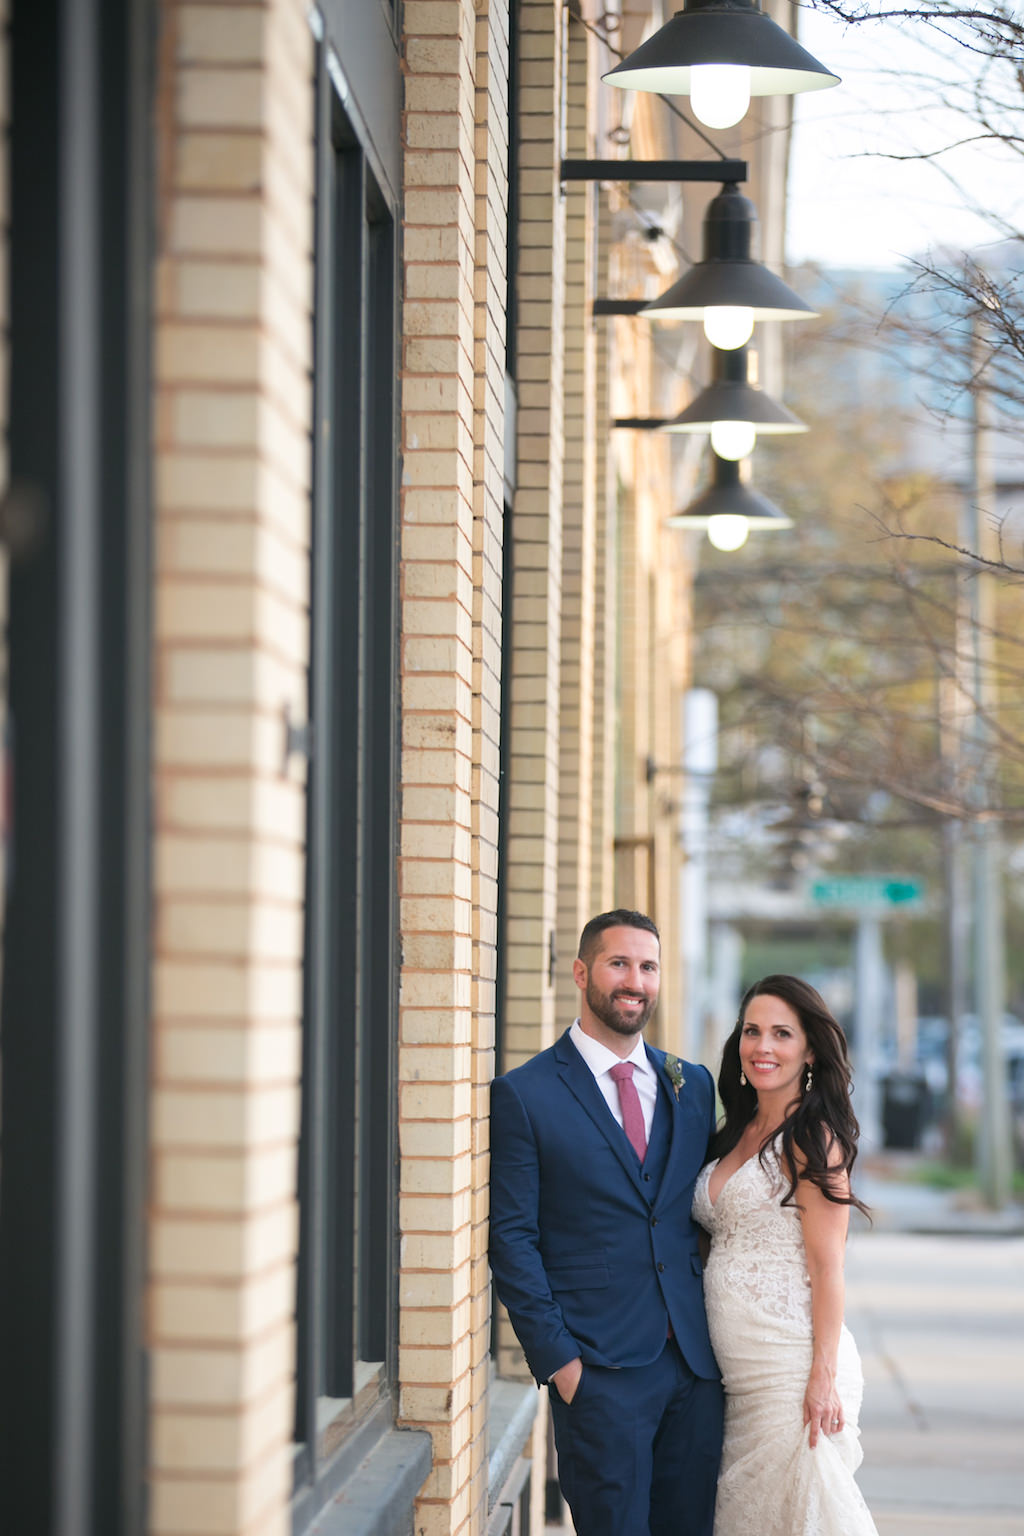 Outdoor Bride and Groom Wedding Portrait, Bride Wearing V-Neck Lace Floor Length Wedding Dress, Curled Hair Down, Groom Wearing Navy Blue Suit and Red Tie | Tampa Bay Wedding Photographer Carrie Wildes Photography